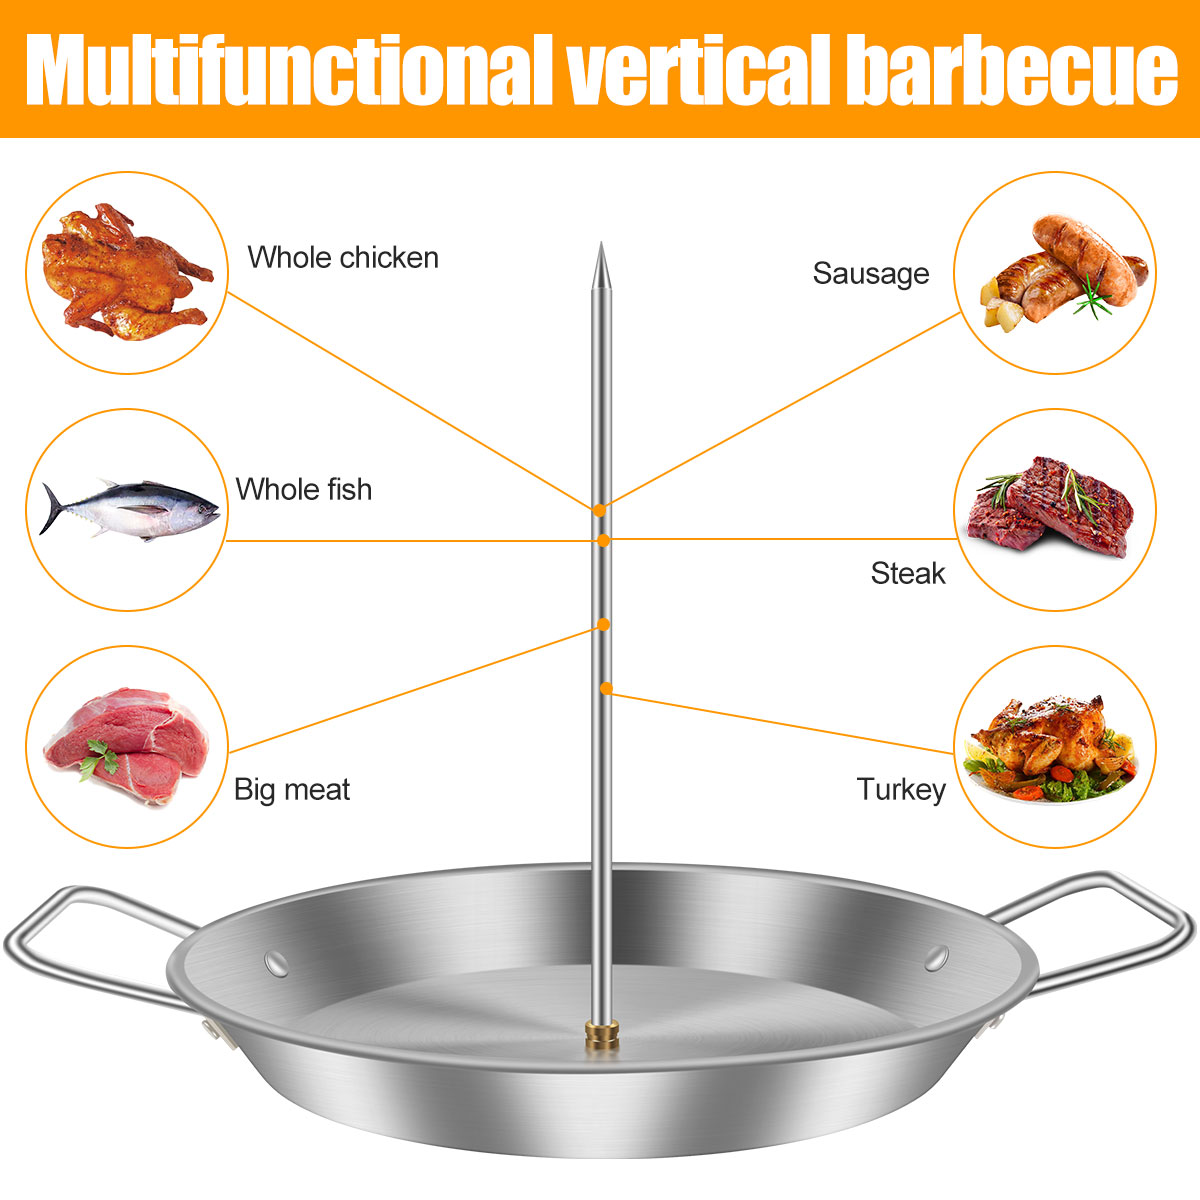 THRENS Vertical Meat Skewer Stainless Steel BBQ Vertical Skewer Grill with 3 Replacement Spikes Barbecue Vertical Skewer Grill Rack Stand with Handle for Whole Chicken Fish Sausage Steak - image 3 of 8